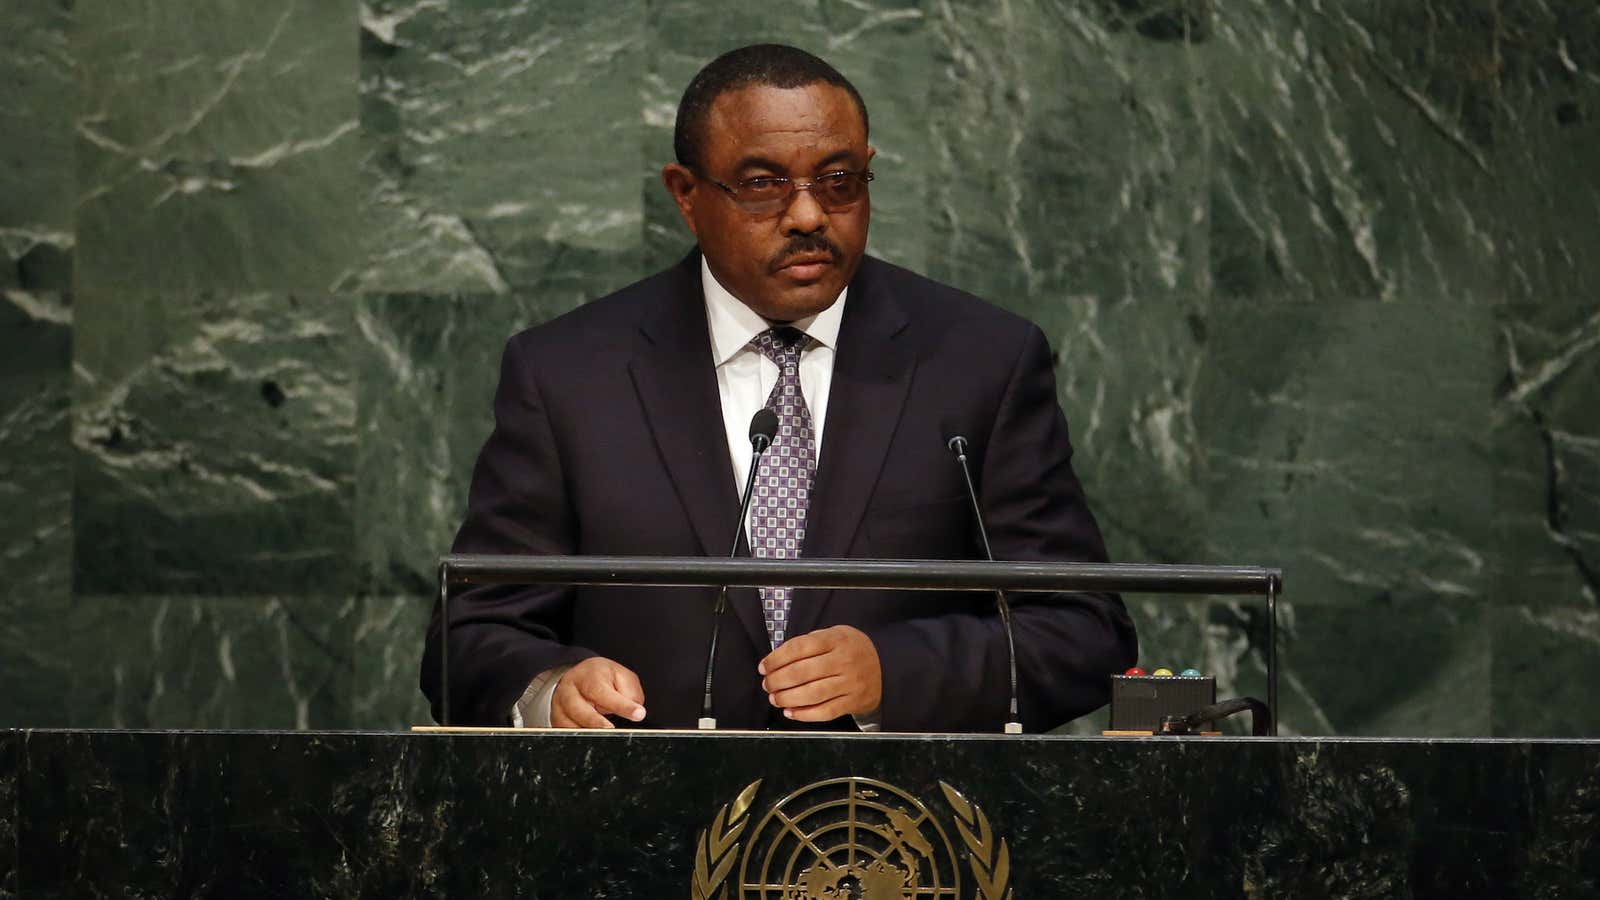 Ethiopia’s prime minister Hailemariam Desalegn was re-elected for a second term.